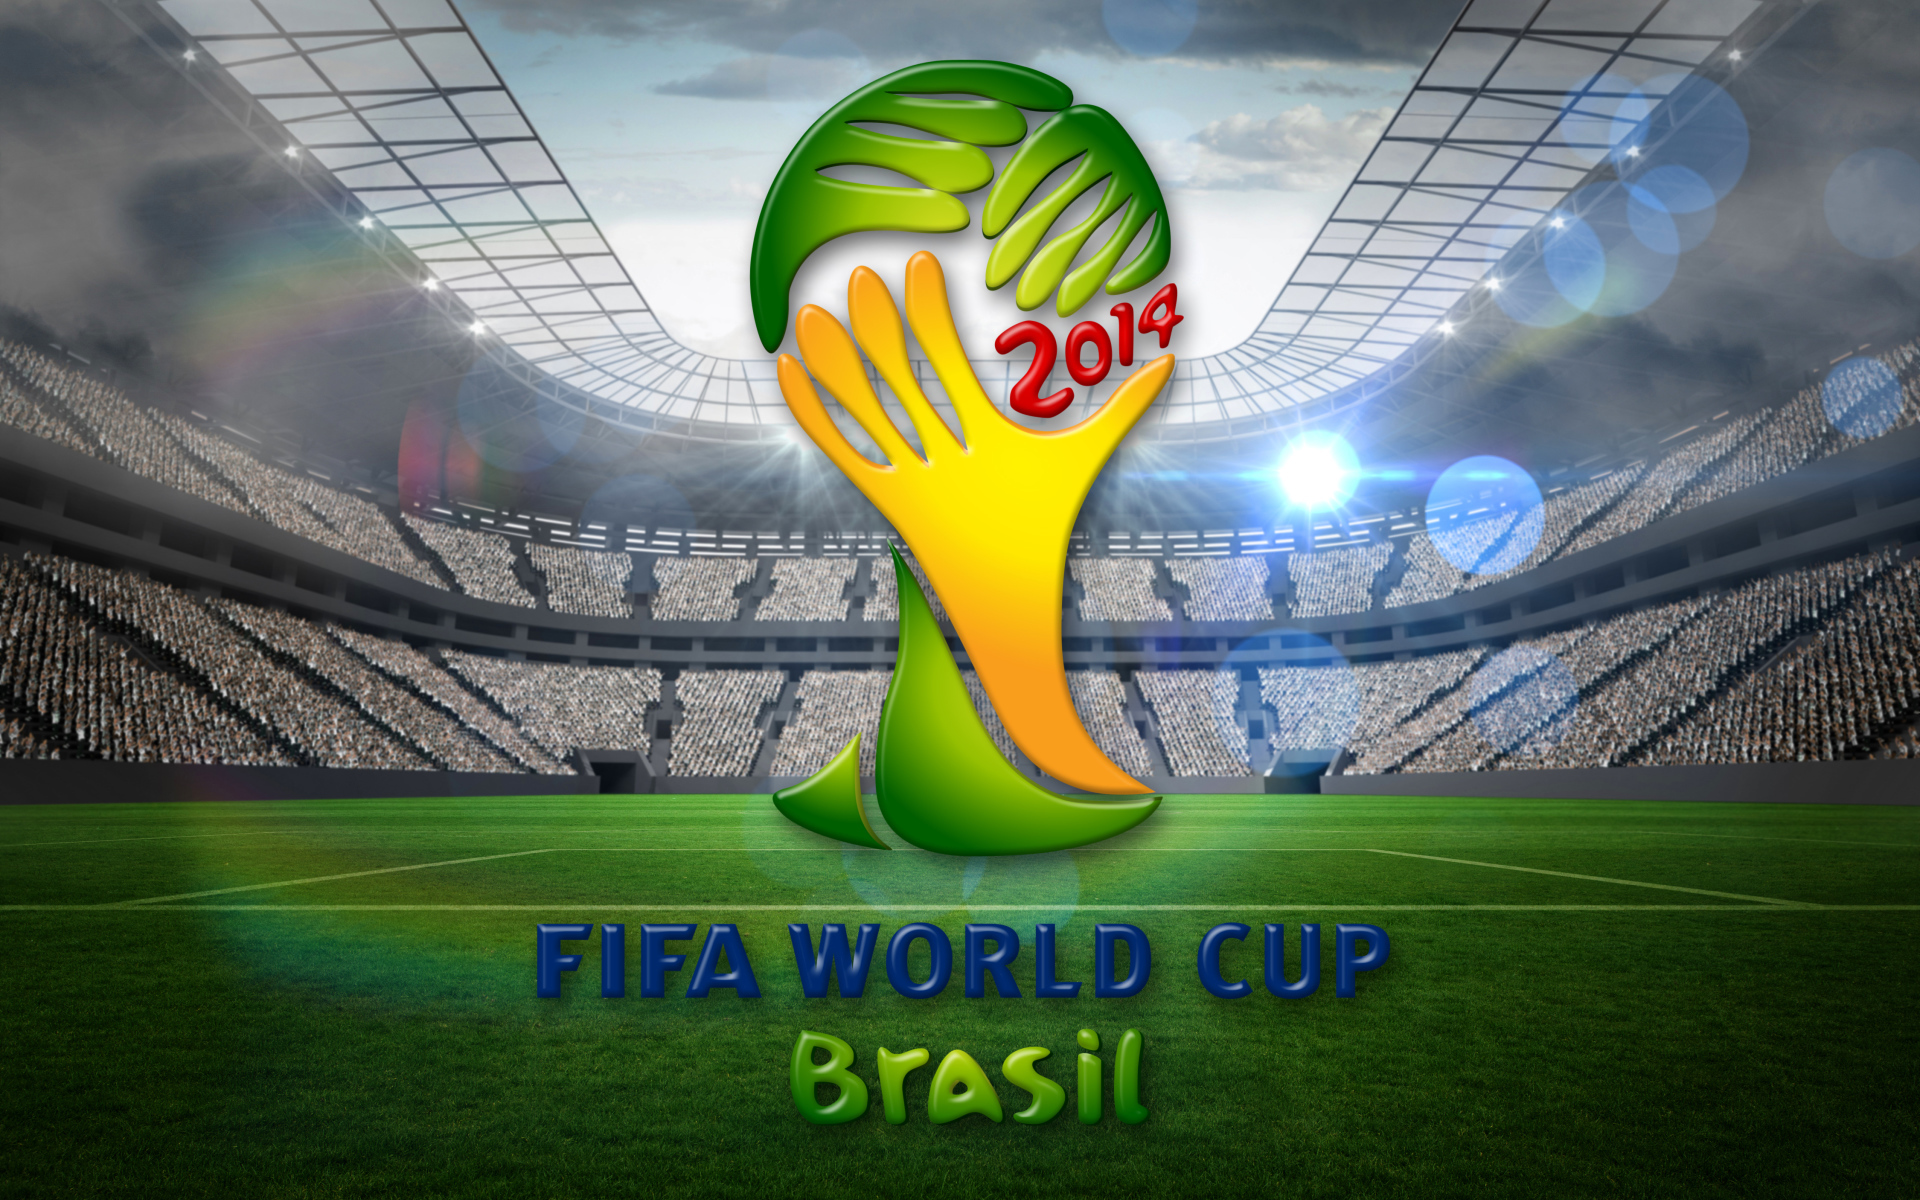 Logo on the background of the stadium at the World Cup in Brazil in 2014